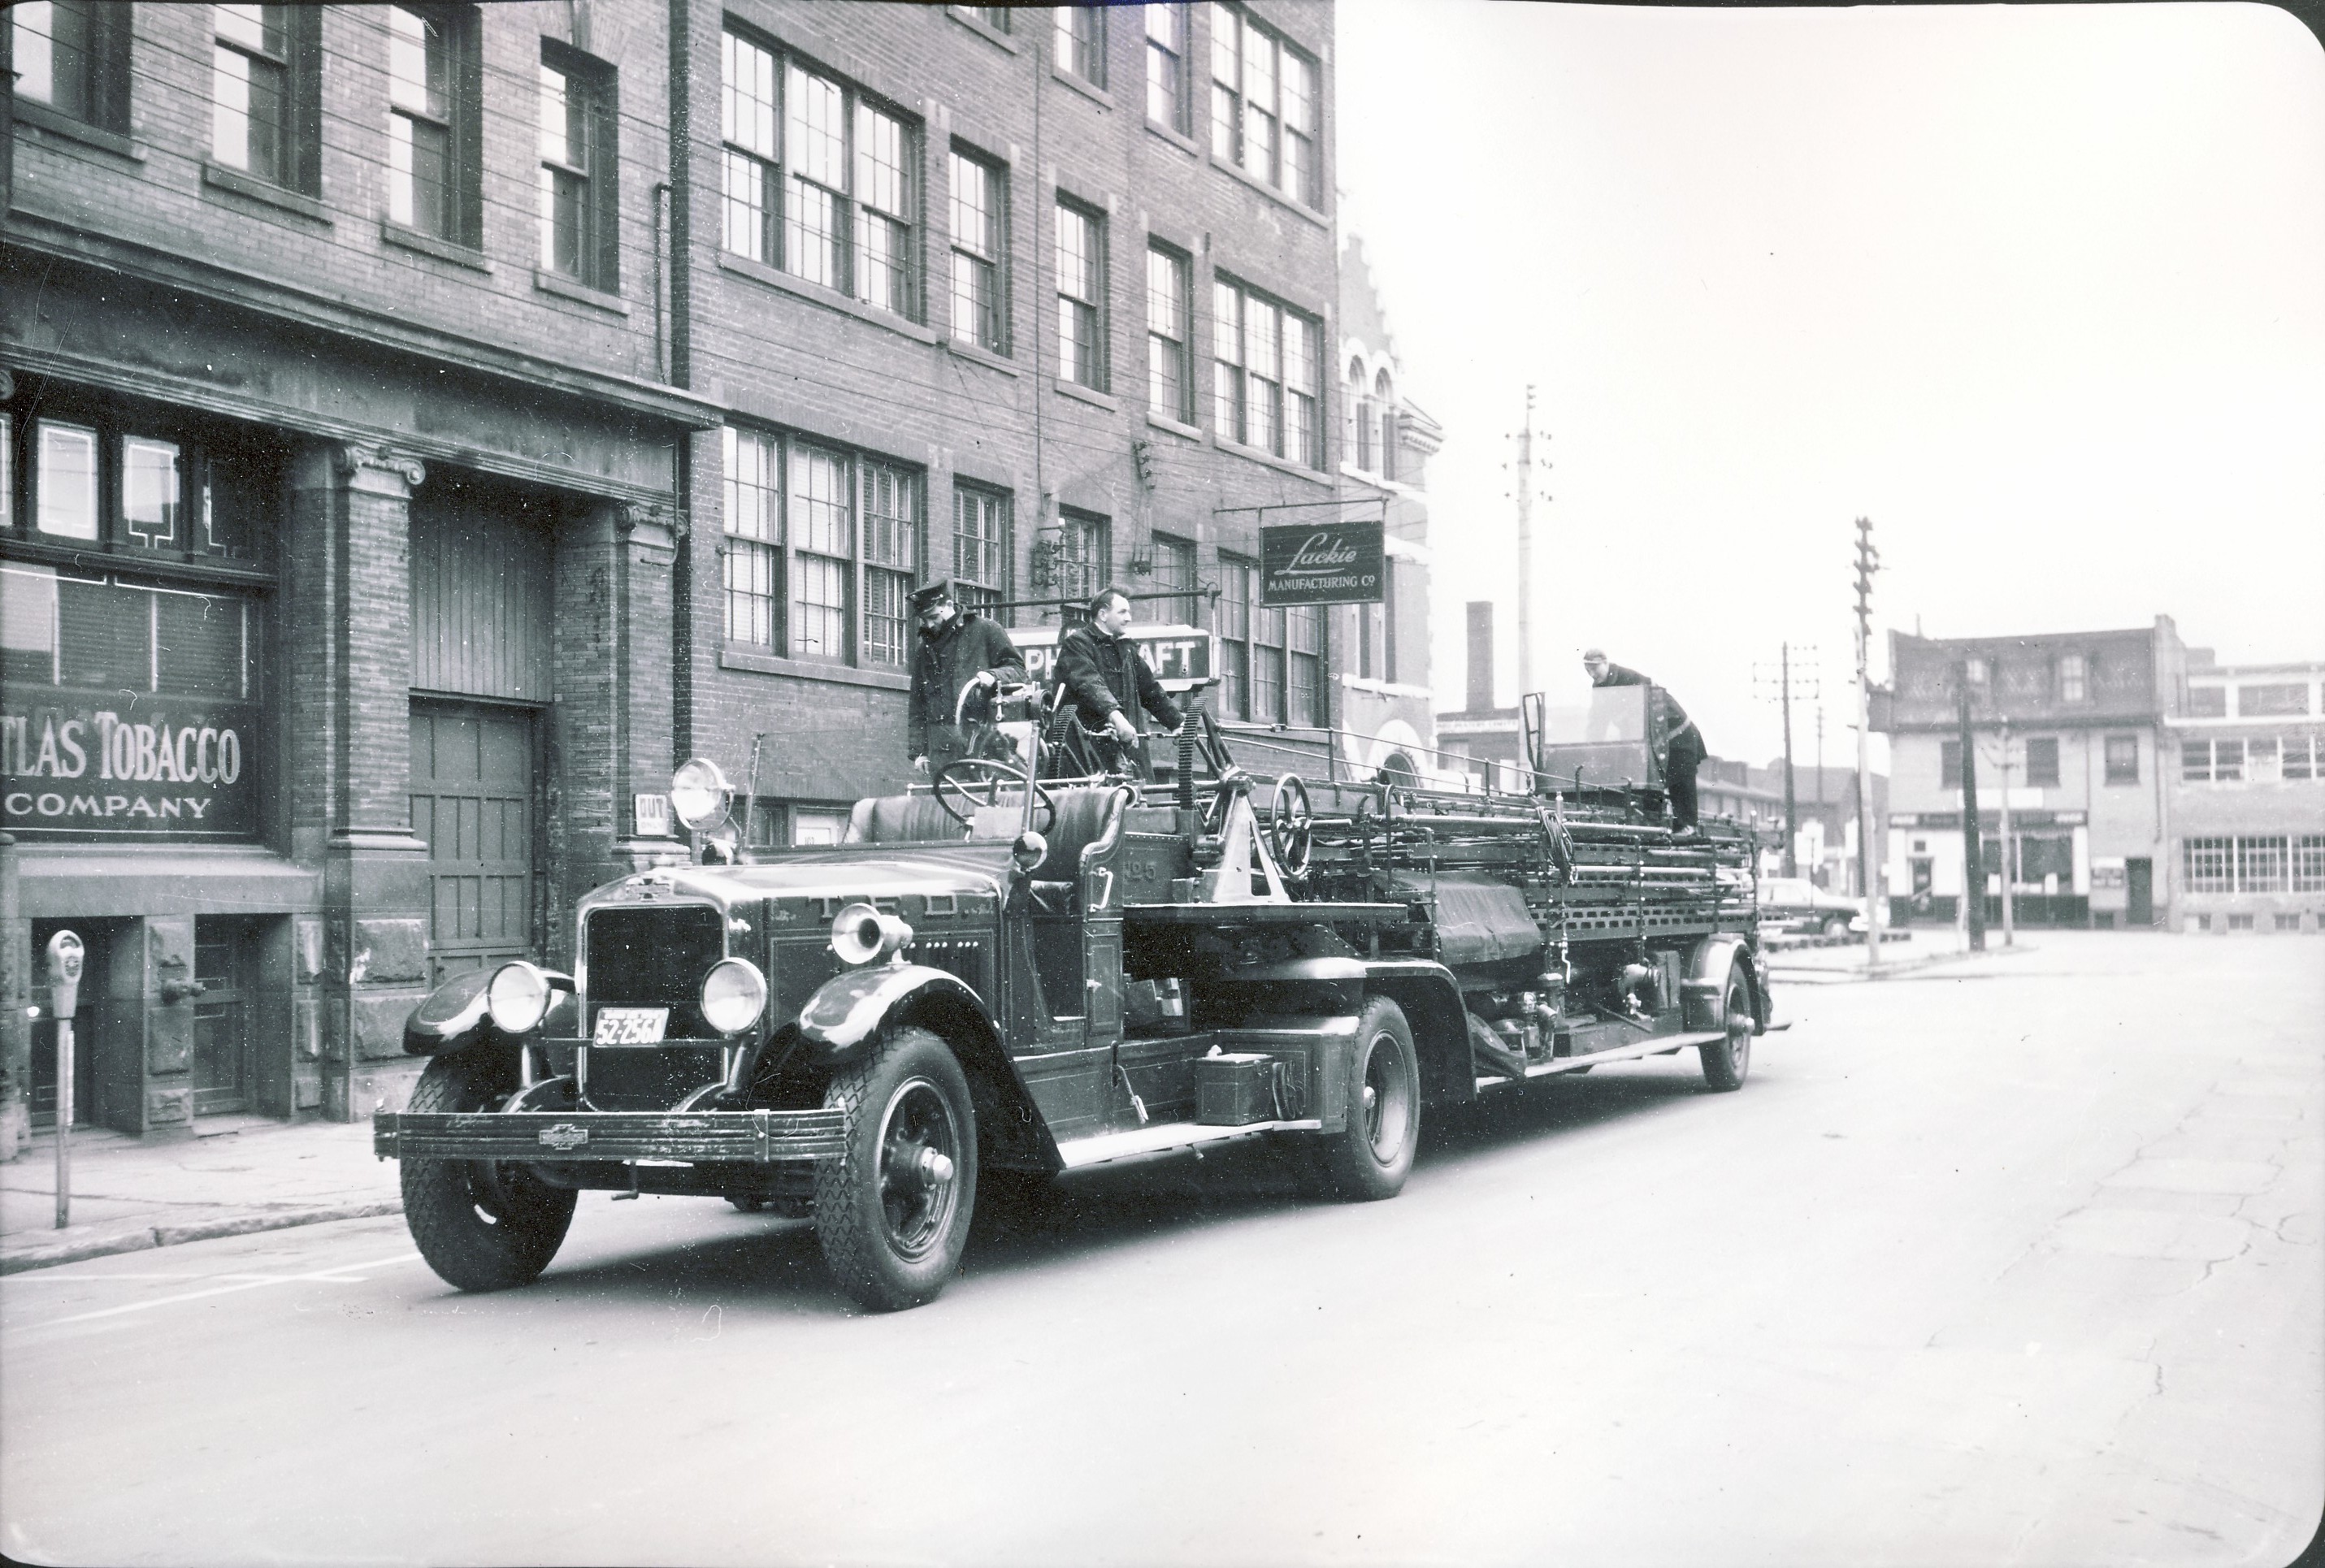 One of the last tillers on the Toronto Fire Department, Aerial 5's 1931 LaFrance Type 217 85' aerial. Shown on Lombard St. on March 6th, 1955.